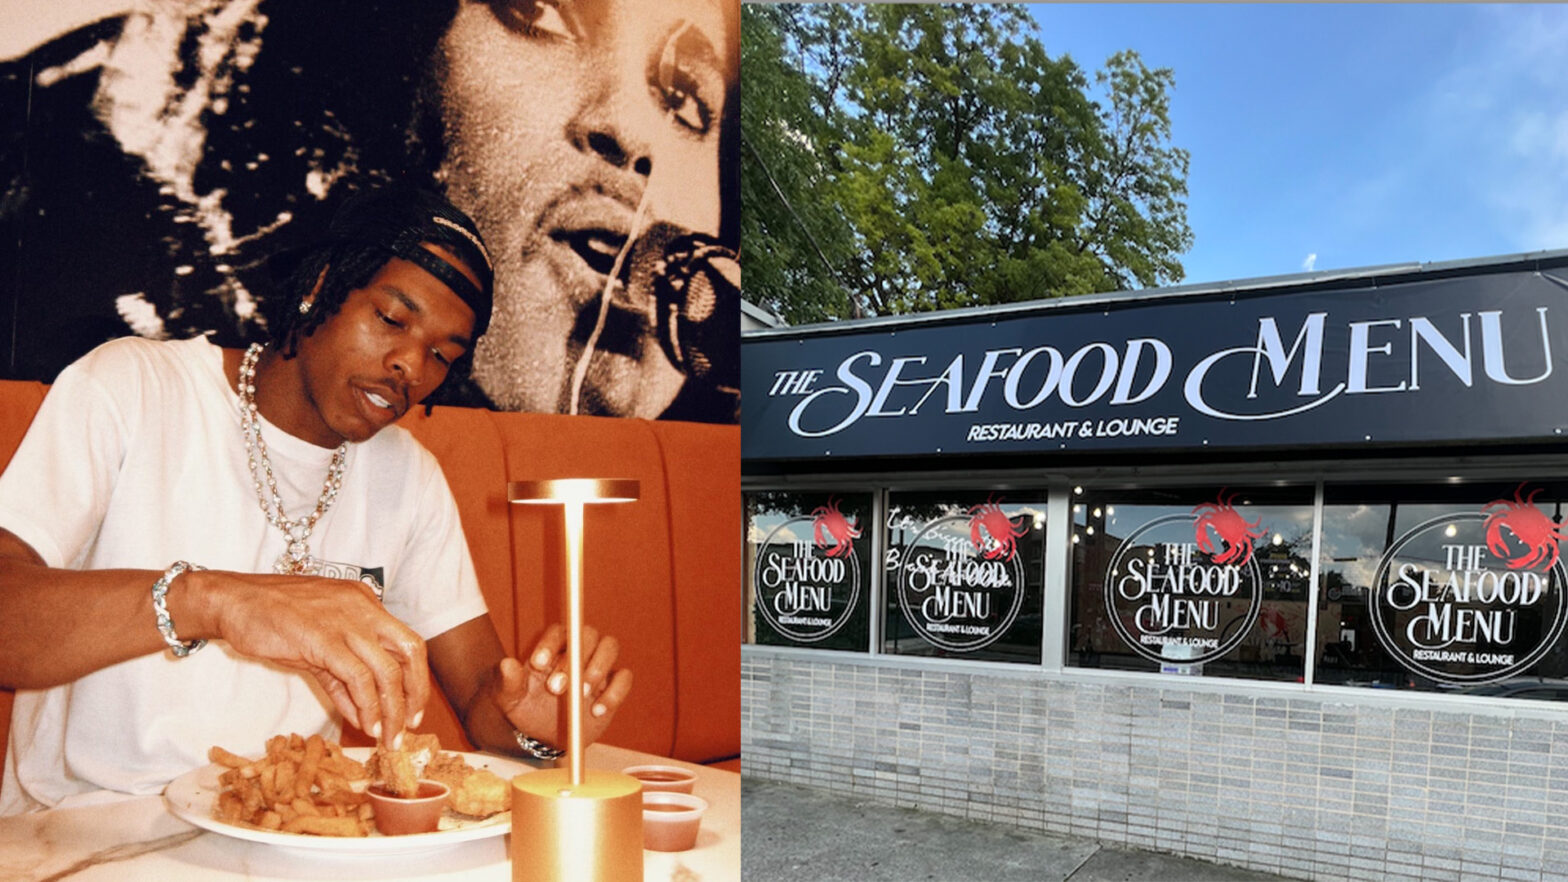 Lil Baby To Open The Seafood Menu Restaurant & Lounge In His Hometown Of Atlanta